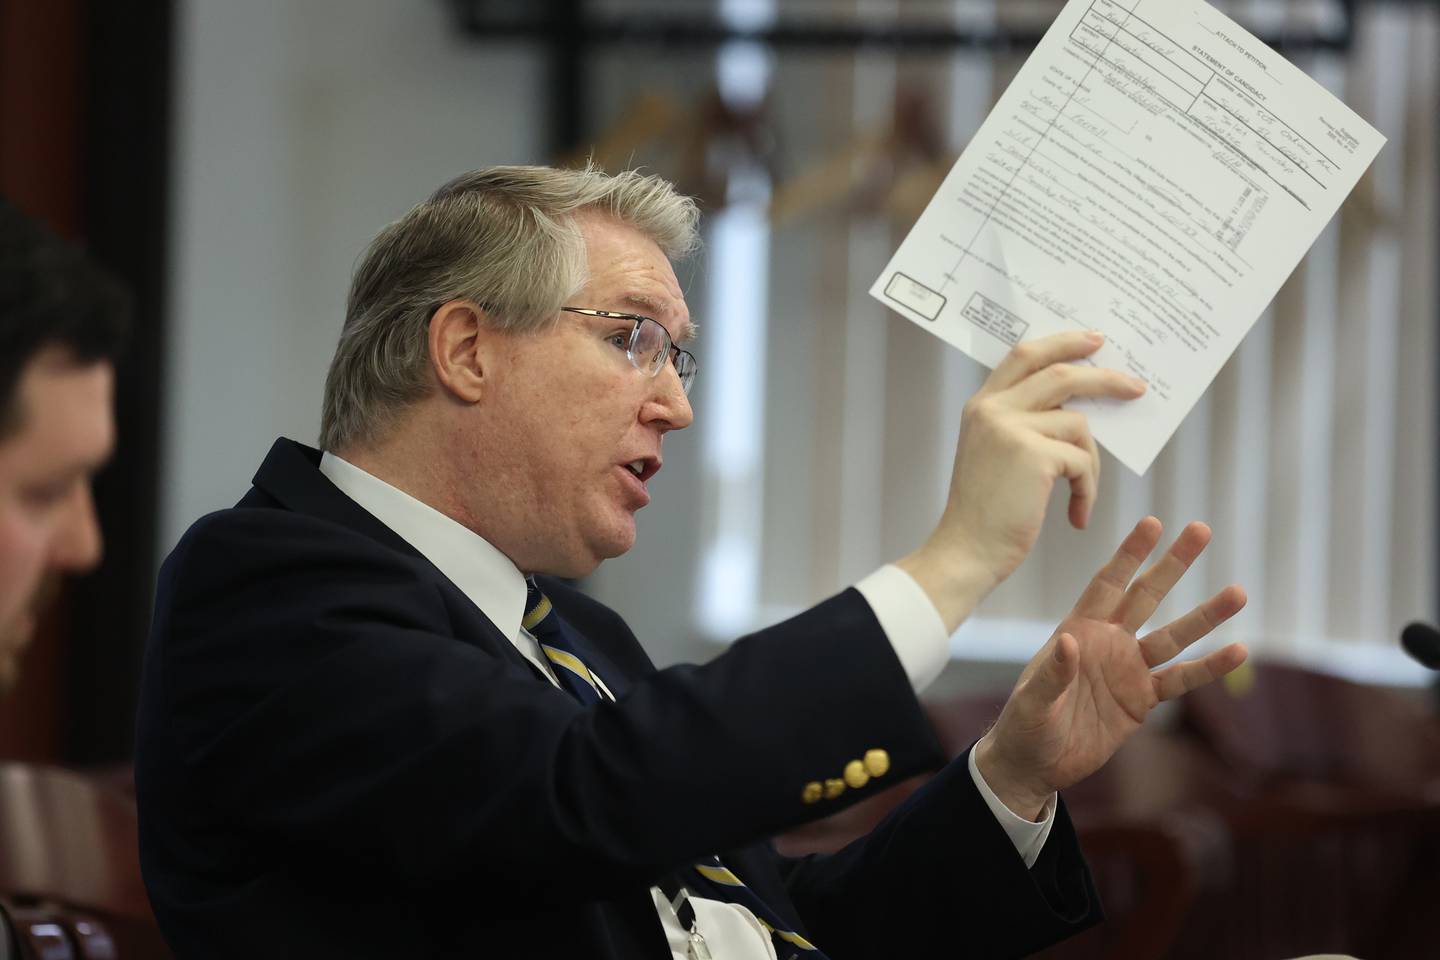 Prosecutor Scott Pyles holds up the Statement of Candidacy which prosecutor’s claim Karl Ferrell falsely filled out during the People v. Ferrell hearing at the Will County Annex building. Will County state’s attorneys are motioning to remove Joliet Township Trustee Karl Ferrell from the township board as they contend his past felony record disqualifies him from holding elected office. Tuesday, Mar. 30, 2022, in Joliet.